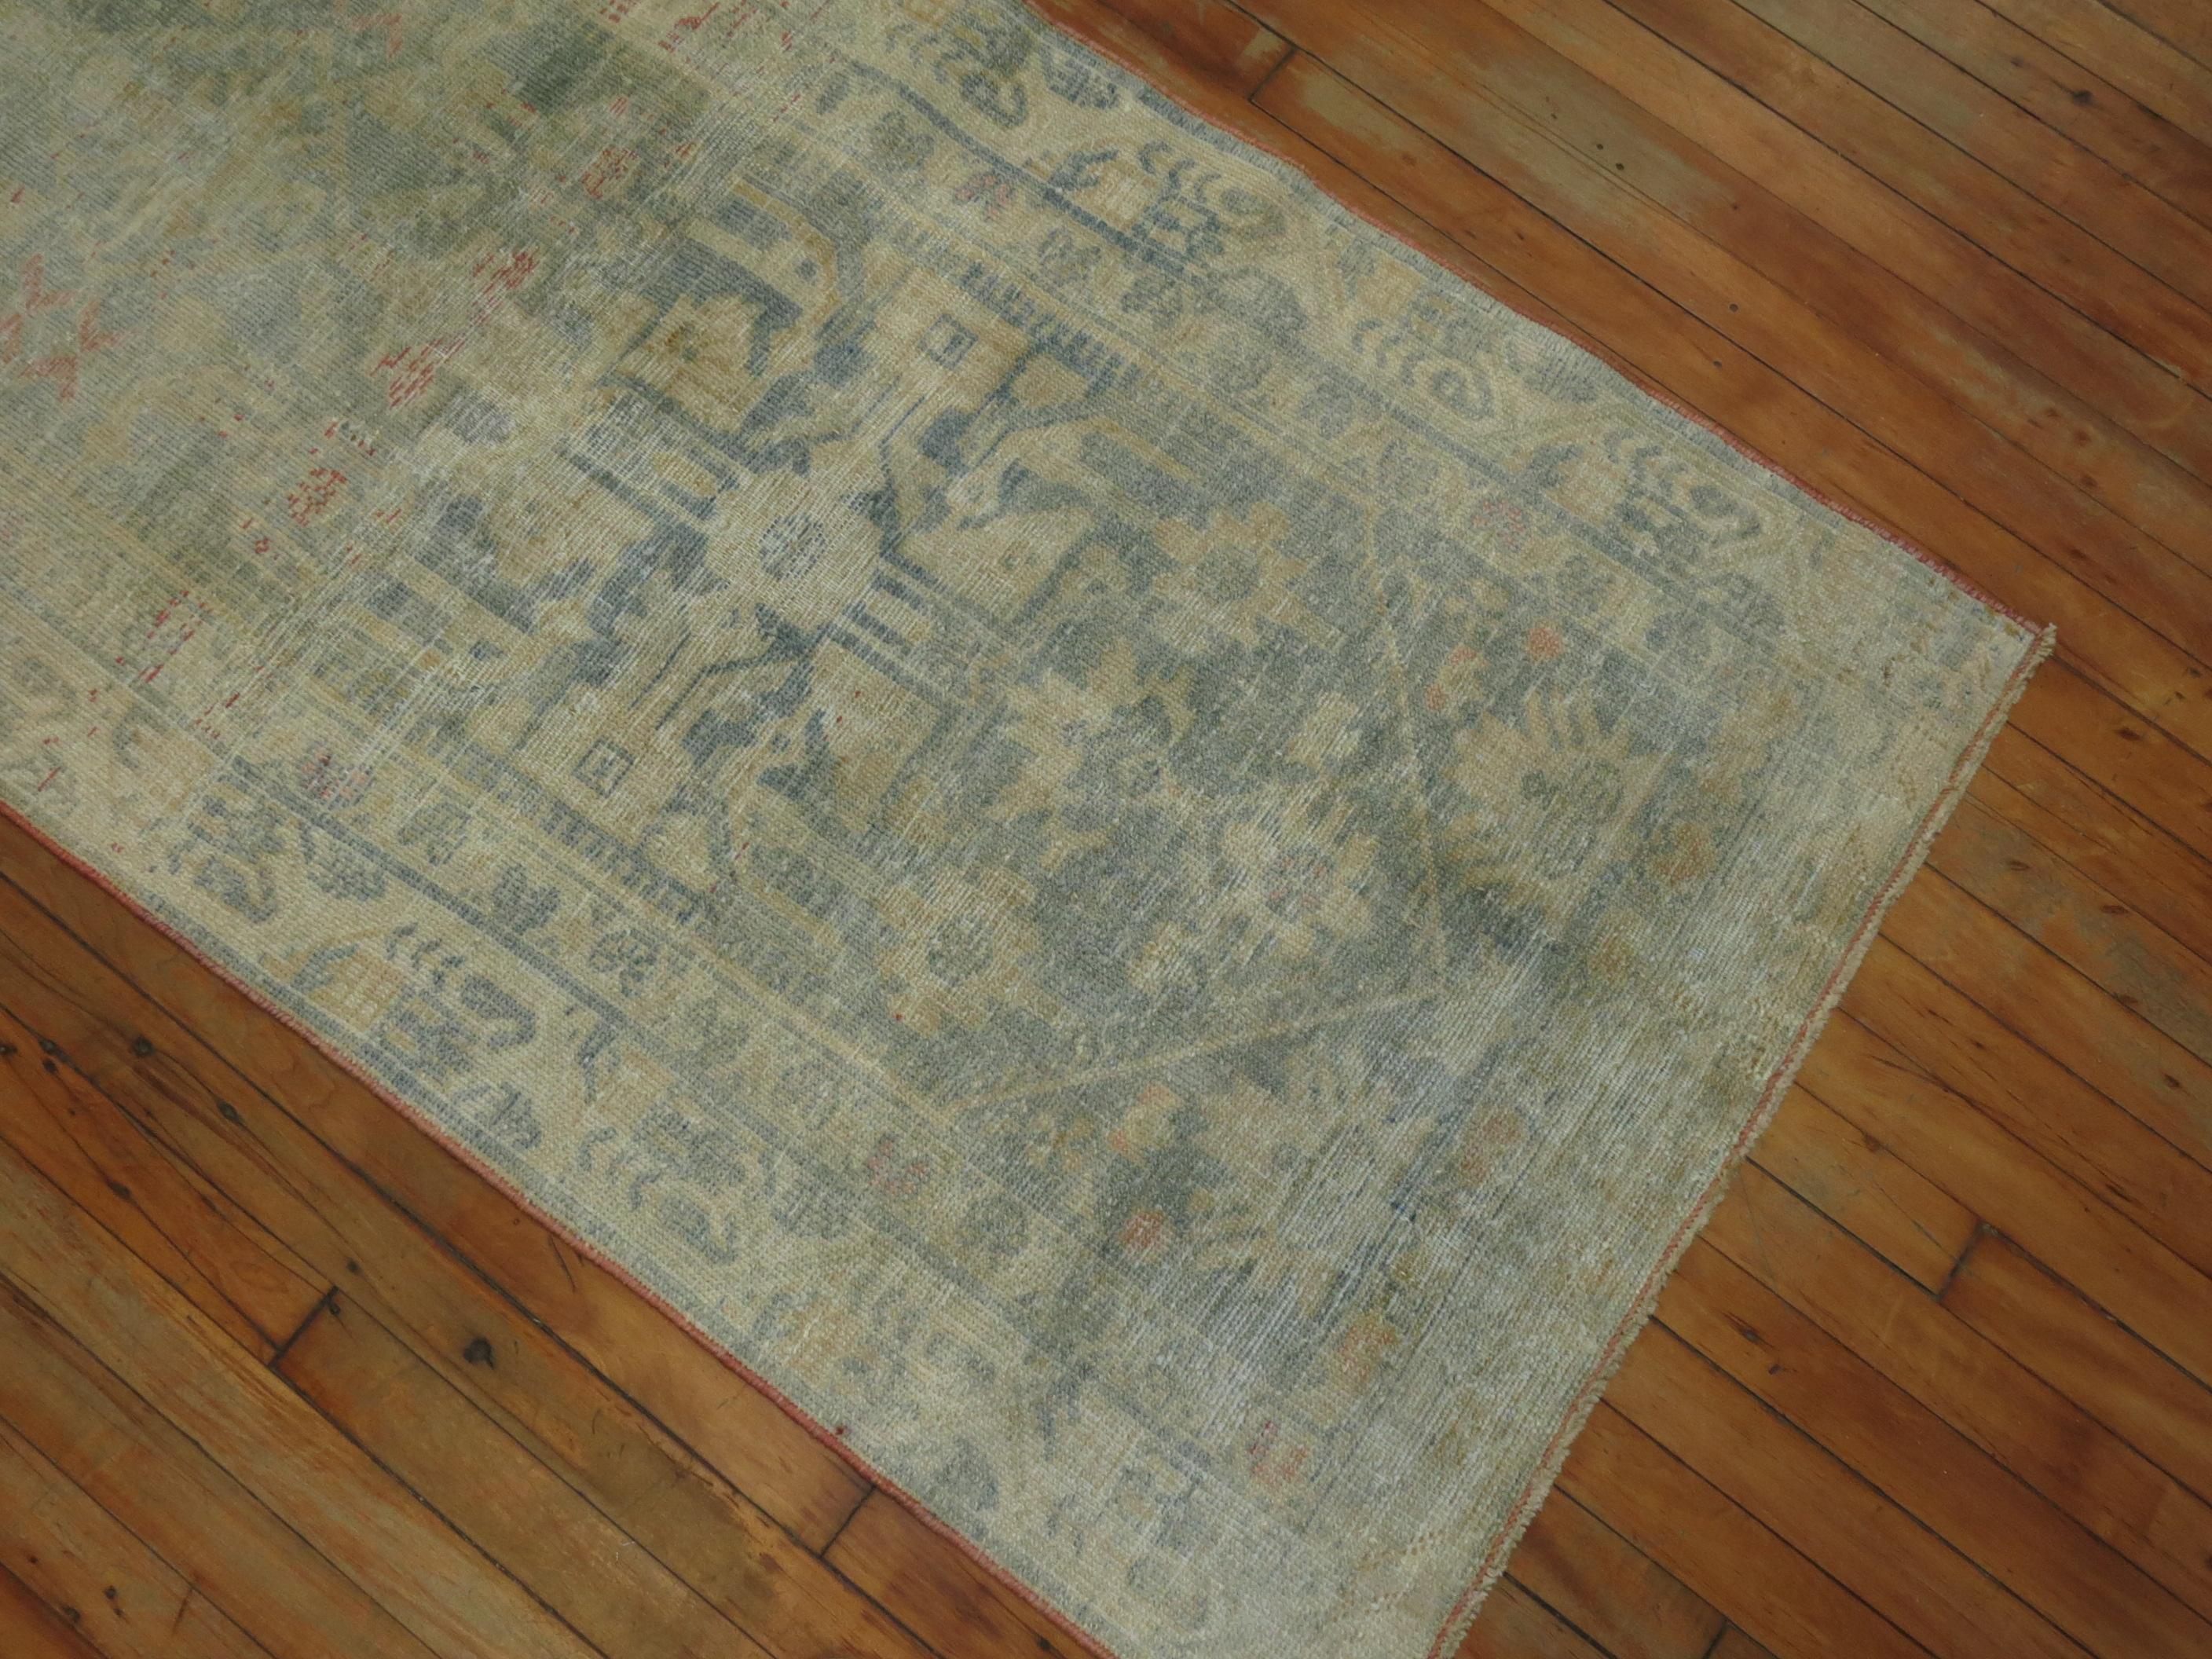 A long decorative pale Persian Malayer runner. Measures: 2'11